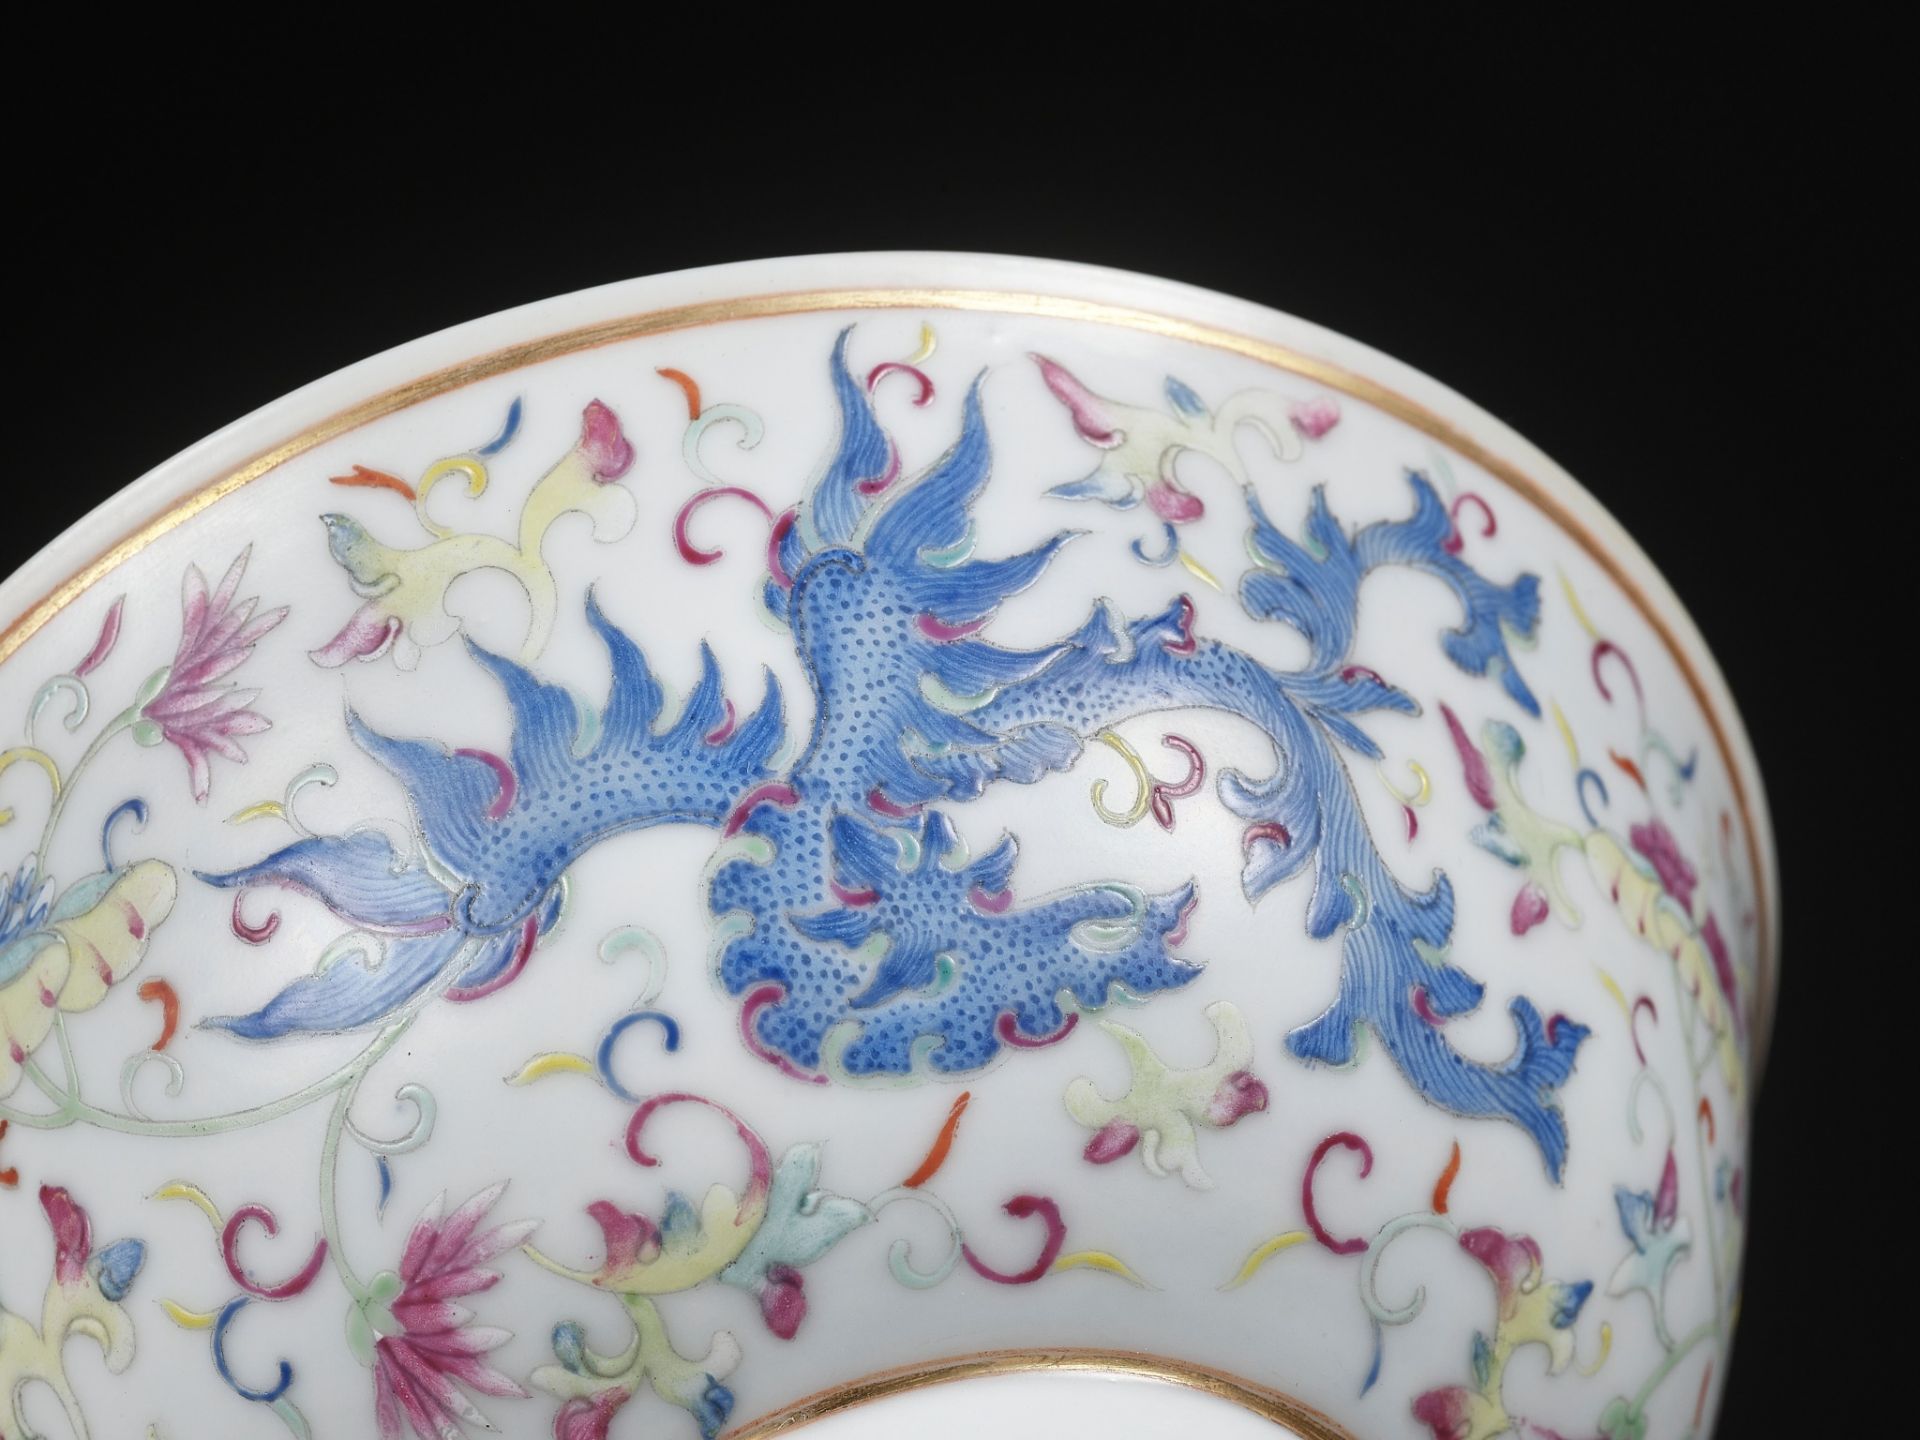 A PAIR OF FAMILLE-ROSE 'PHOENIX' BOWLS, GUANGXU MARK AND PERIOD - Image 8 of 16